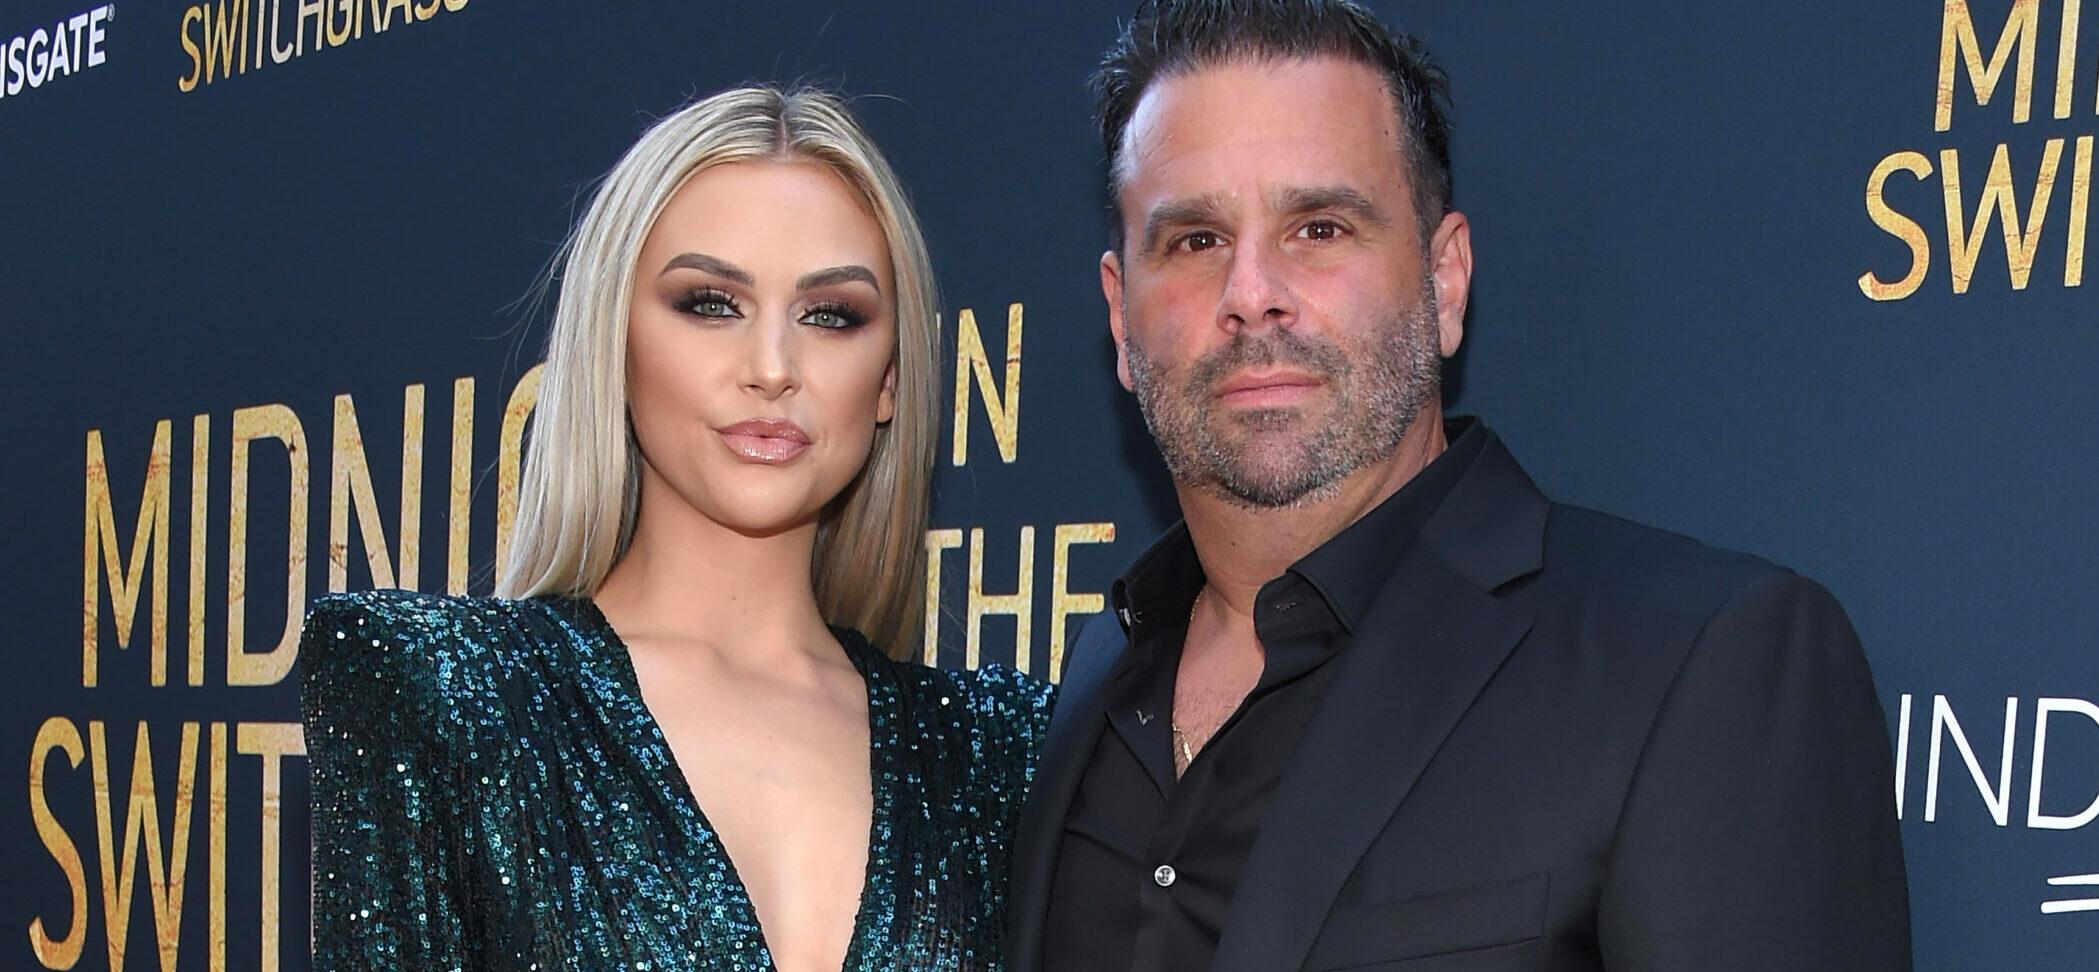 ‘Vanderpump Rules’ Star Lala Kent Claims Diamond Engagement Ring Was A FAKE!